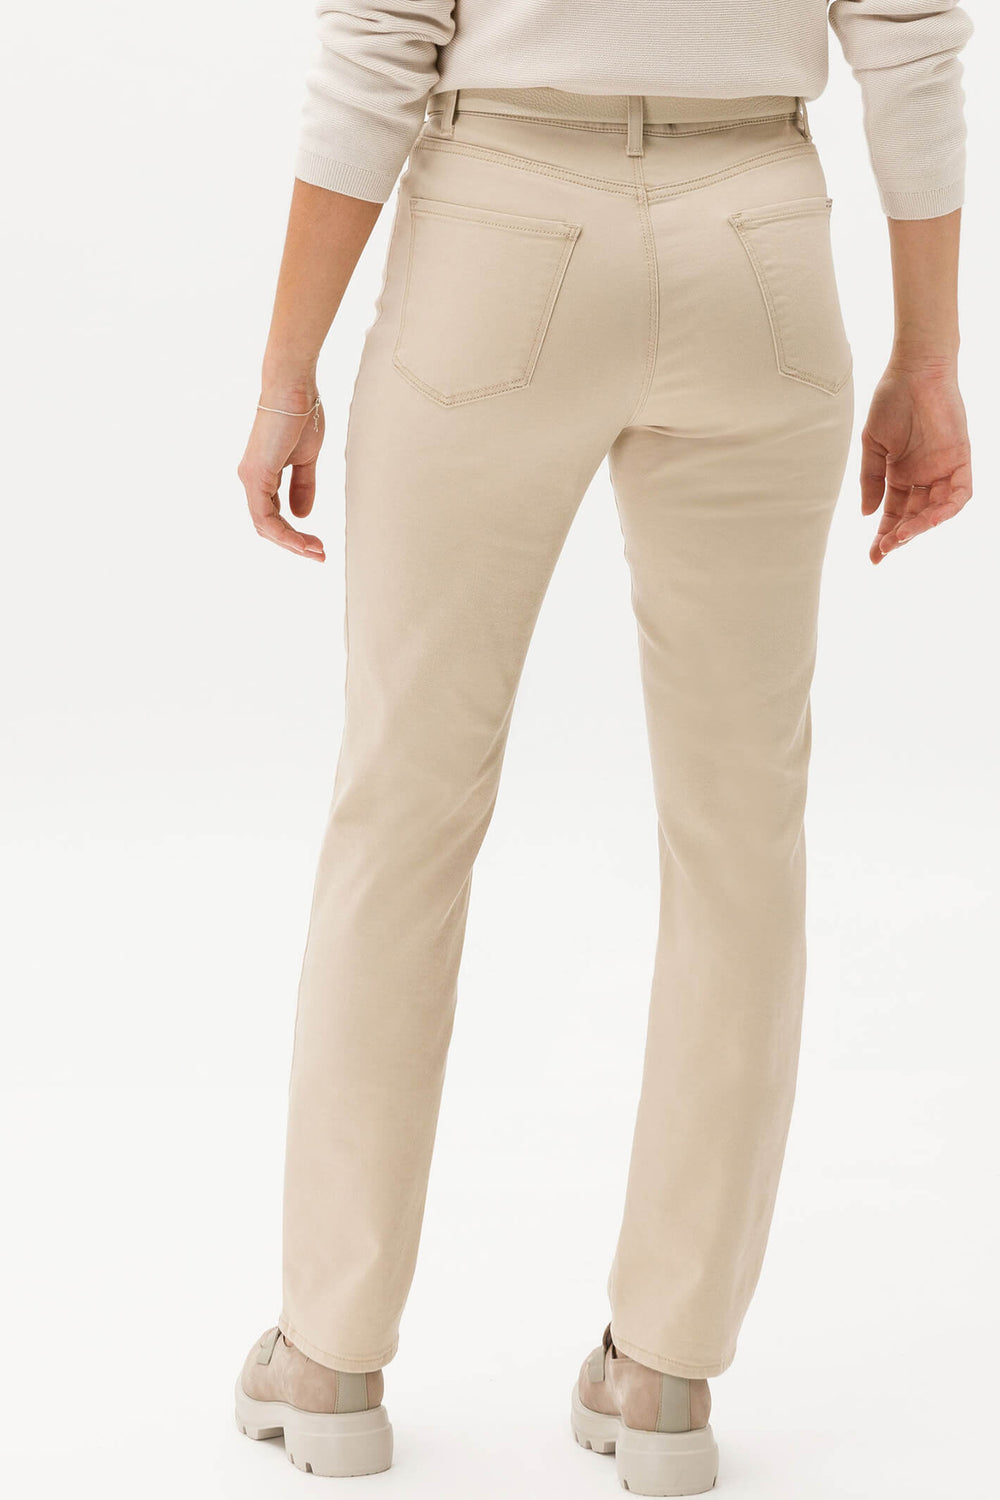 Brax 72-4058 56 Mary Sand Beige Slim Fit Straight Cut Five Pocket Jeans - Shirley Allum Boutique